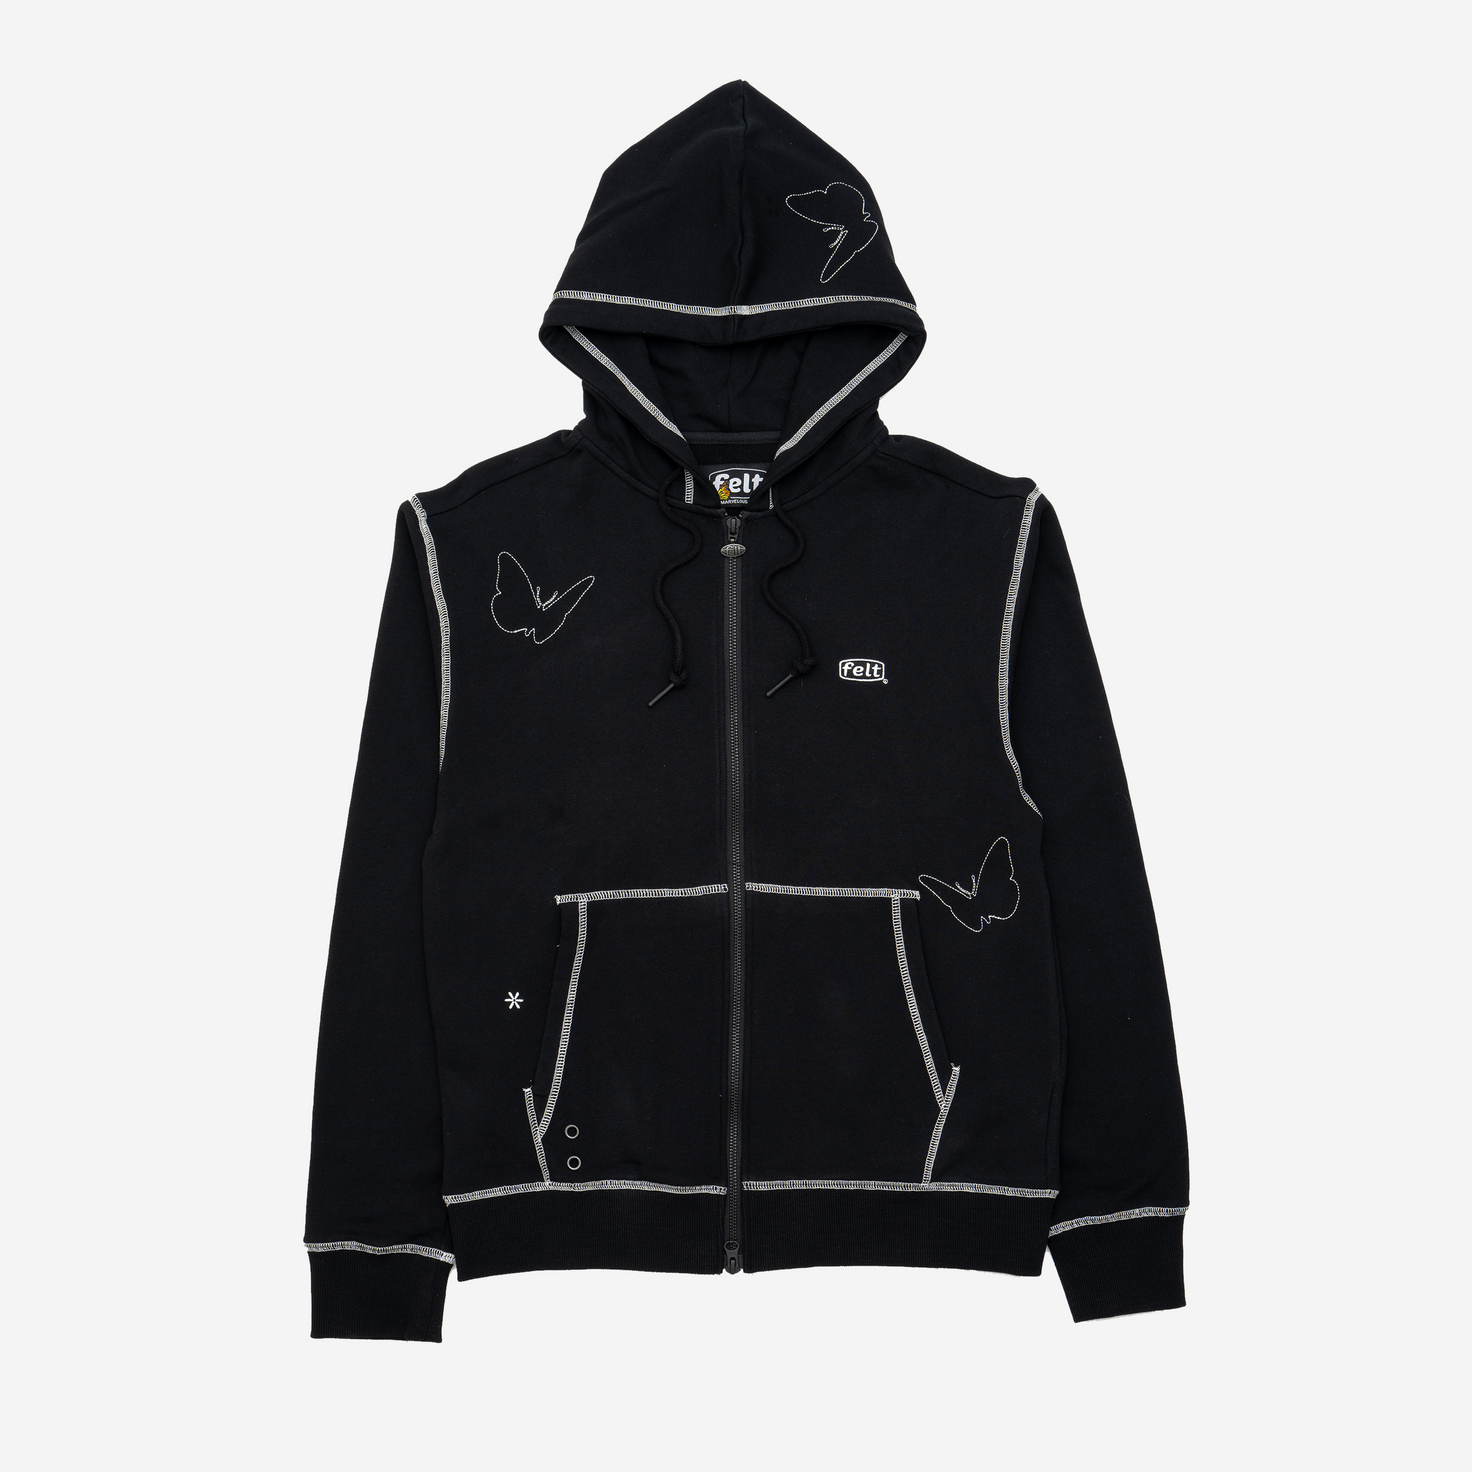 CONTRAST STITCHED HOODIE